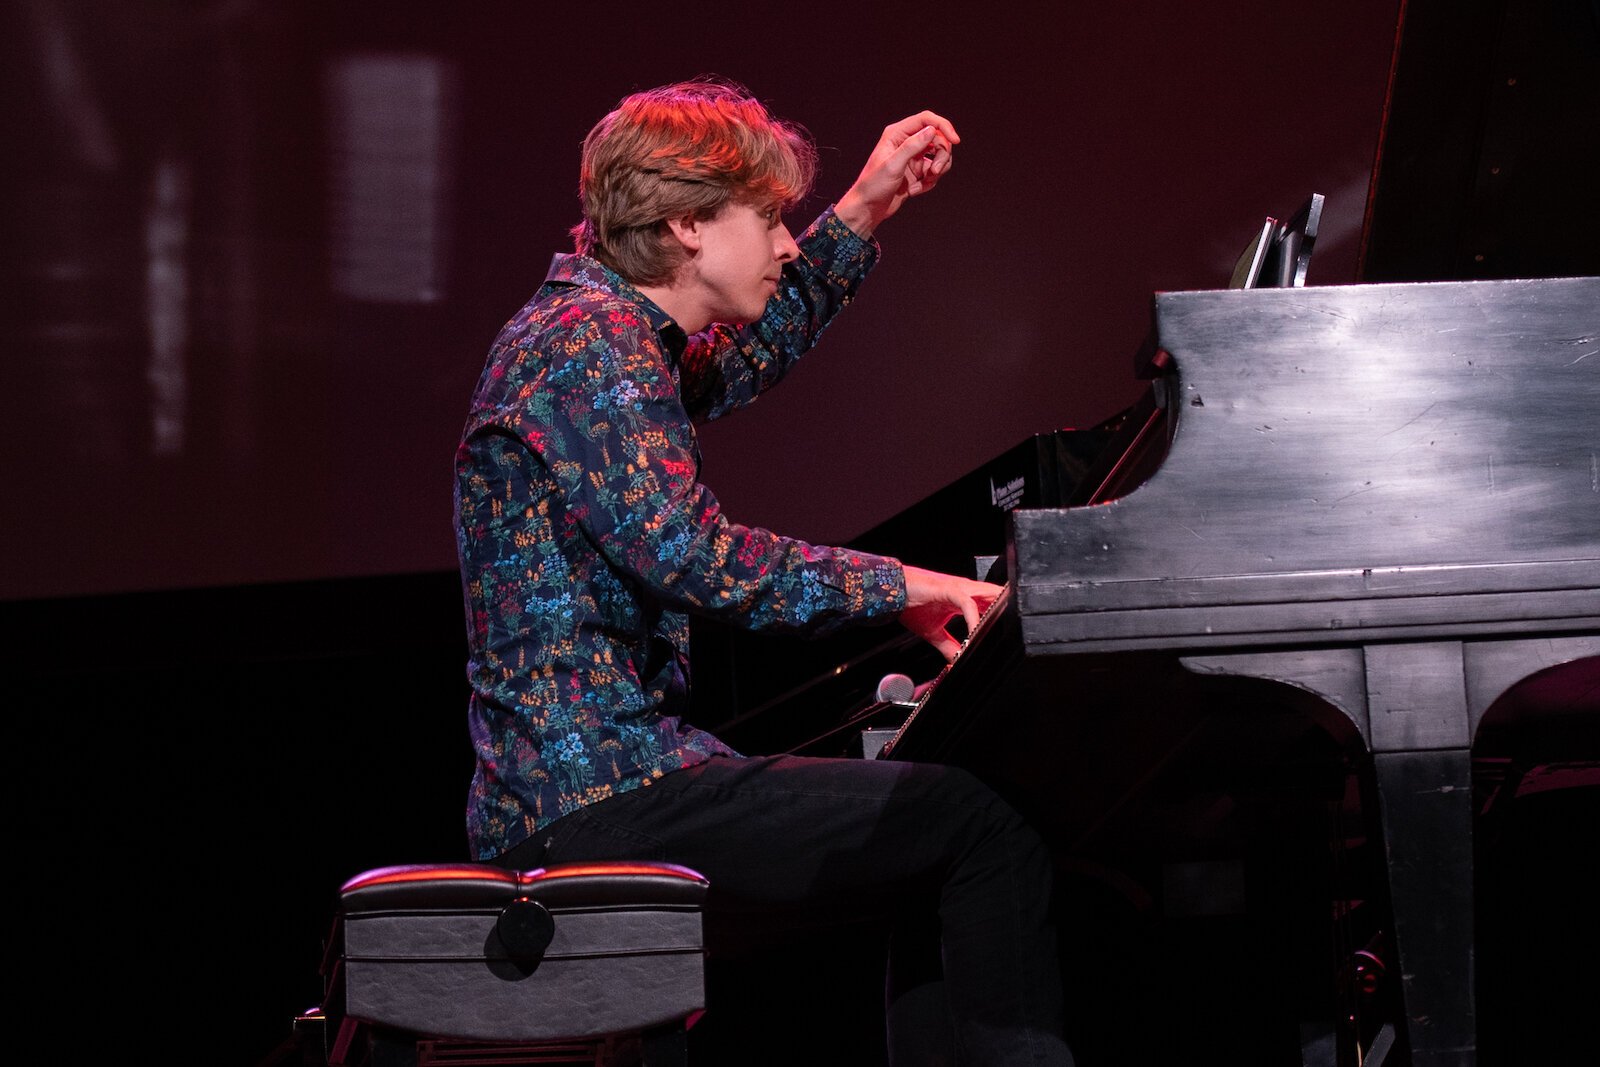 The Honeywell Arts Academy welcomes talented musical artists to immerse themselves in an experiential learning program like no other, comprised of group performances, entrepreneurial development fine-tuning, and more.